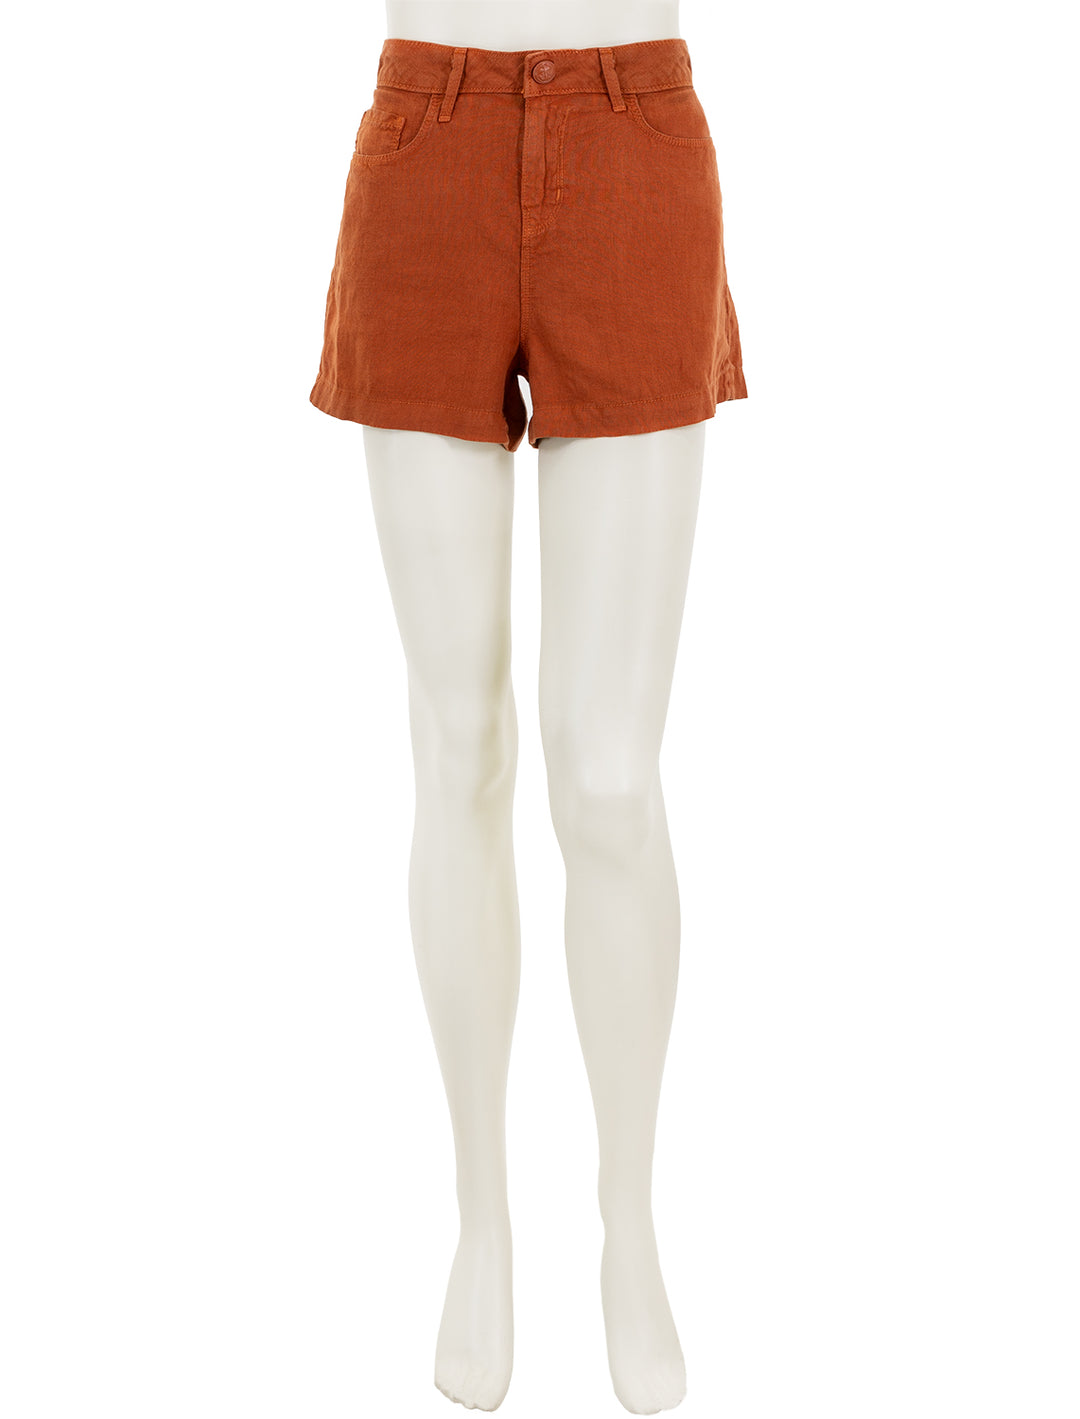 Front view of L'agence's gina shorts in sienna.